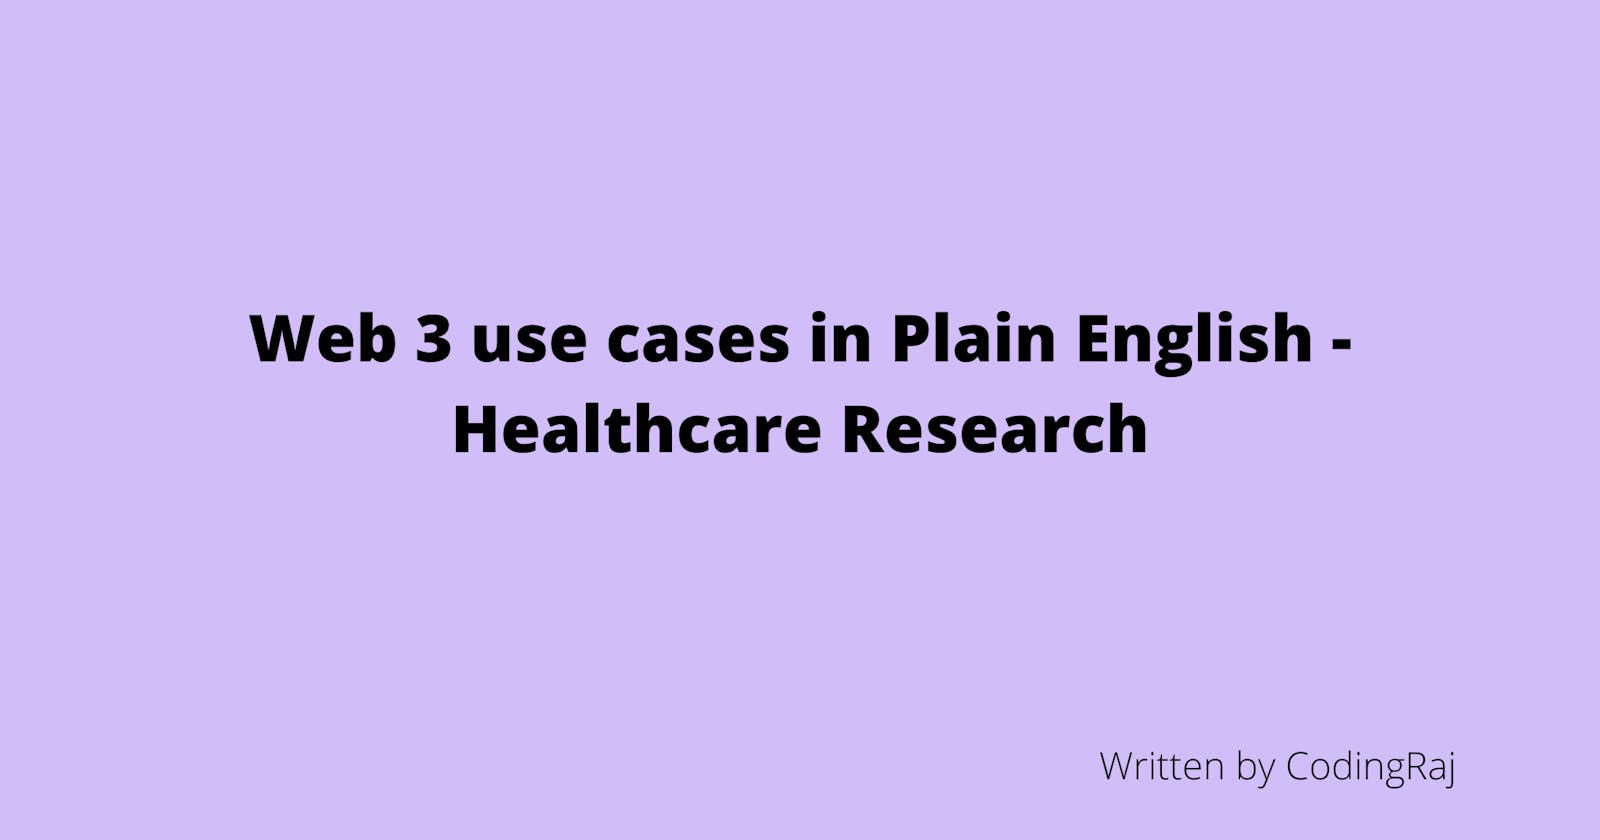 Web 3 use cases in Plain English- Healthcare Research